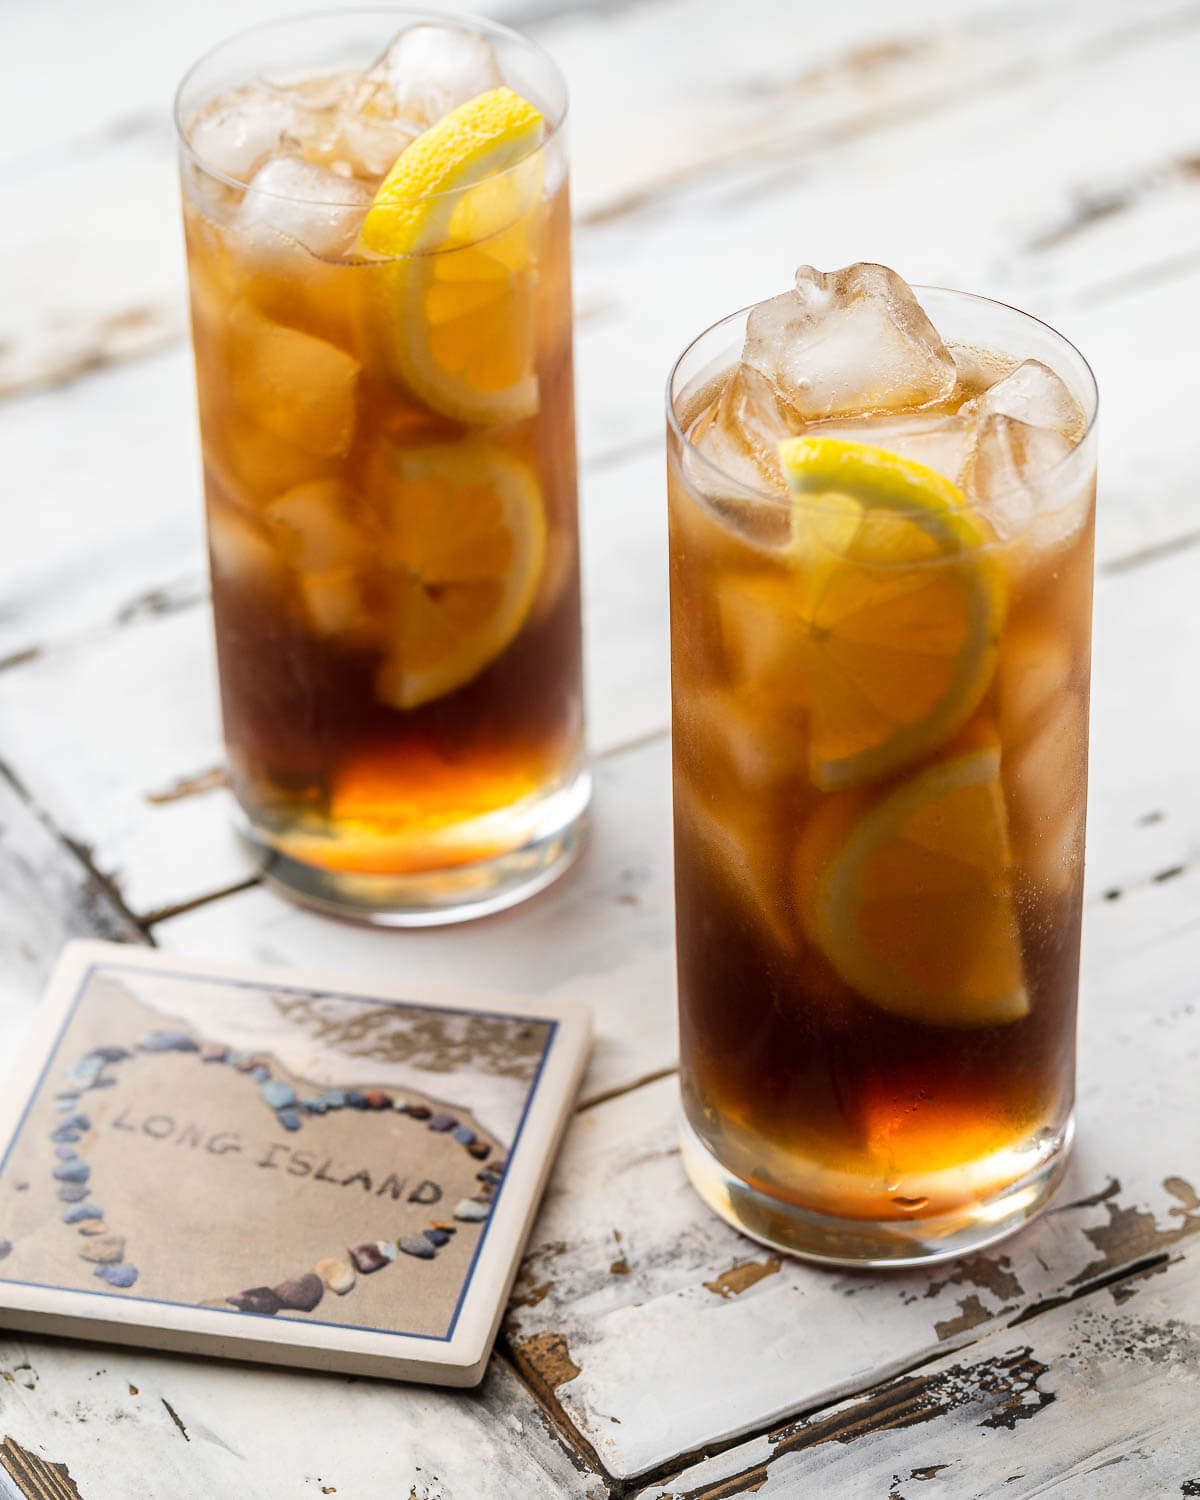 Two glasses of Long Island iced tea along with coaster of Long Island.